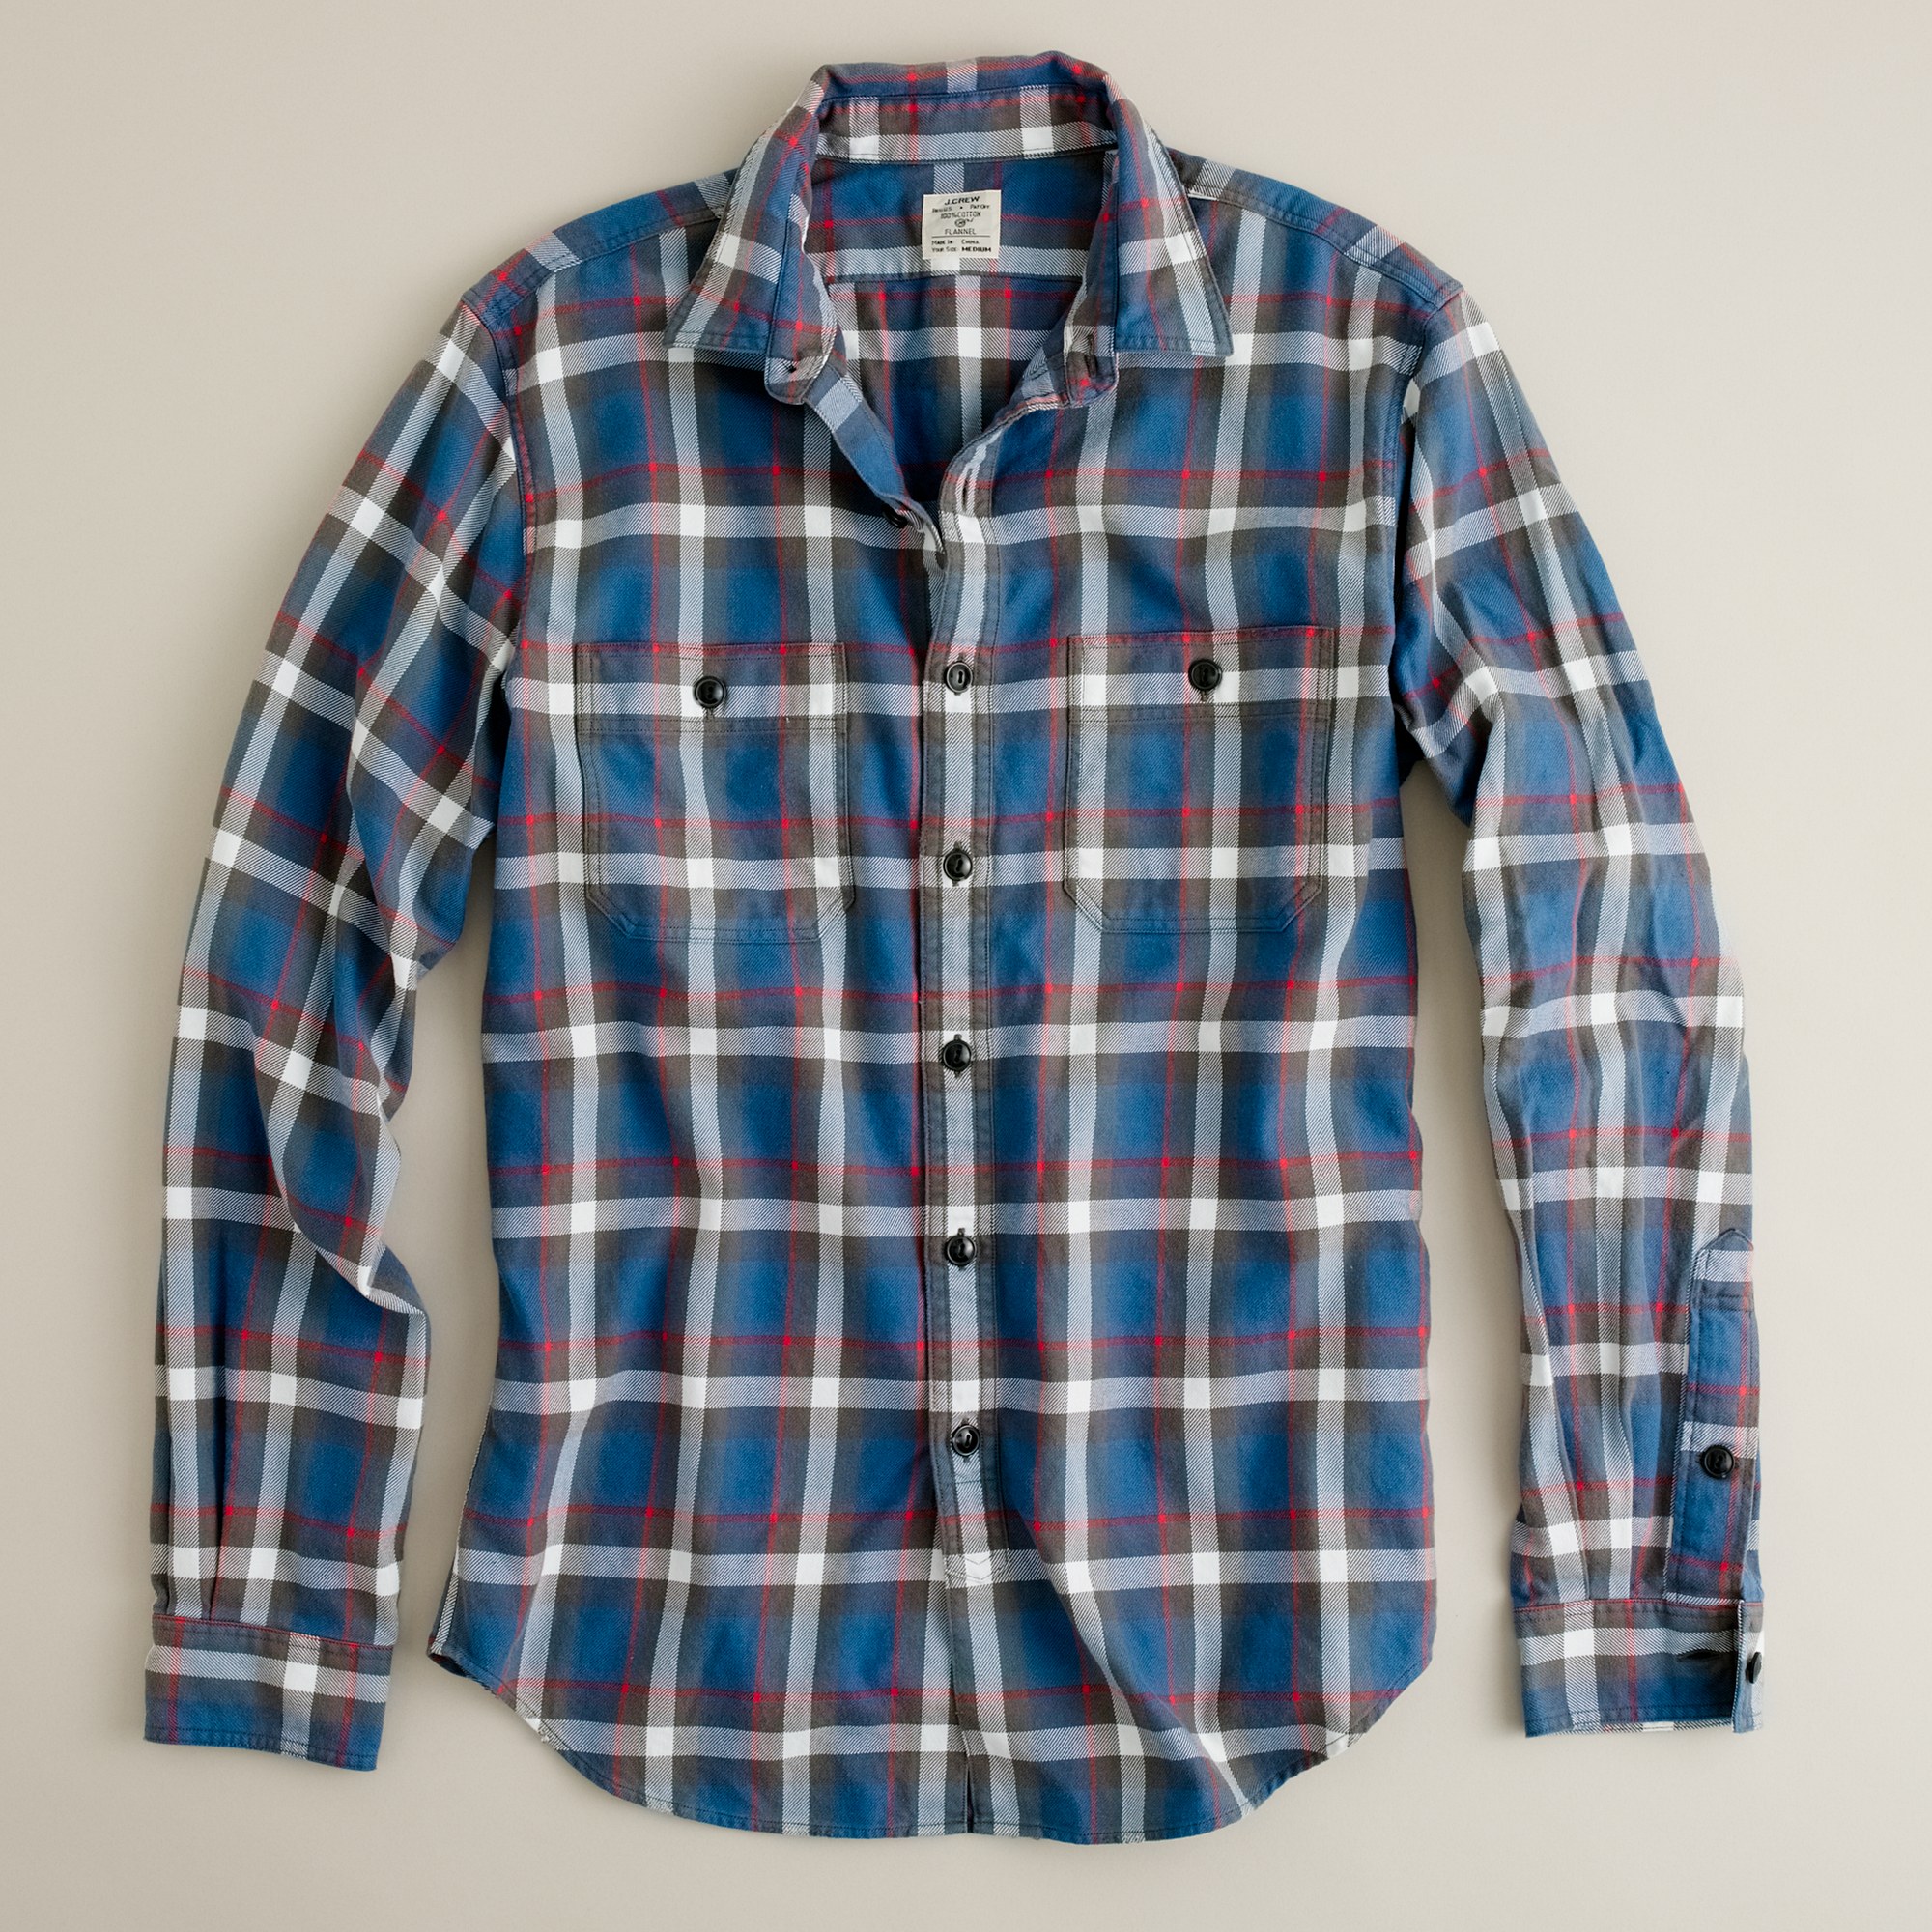 J.Crew Vintage Flannel Shirt in Youngstown Plaid in Blue for Men - Lyst